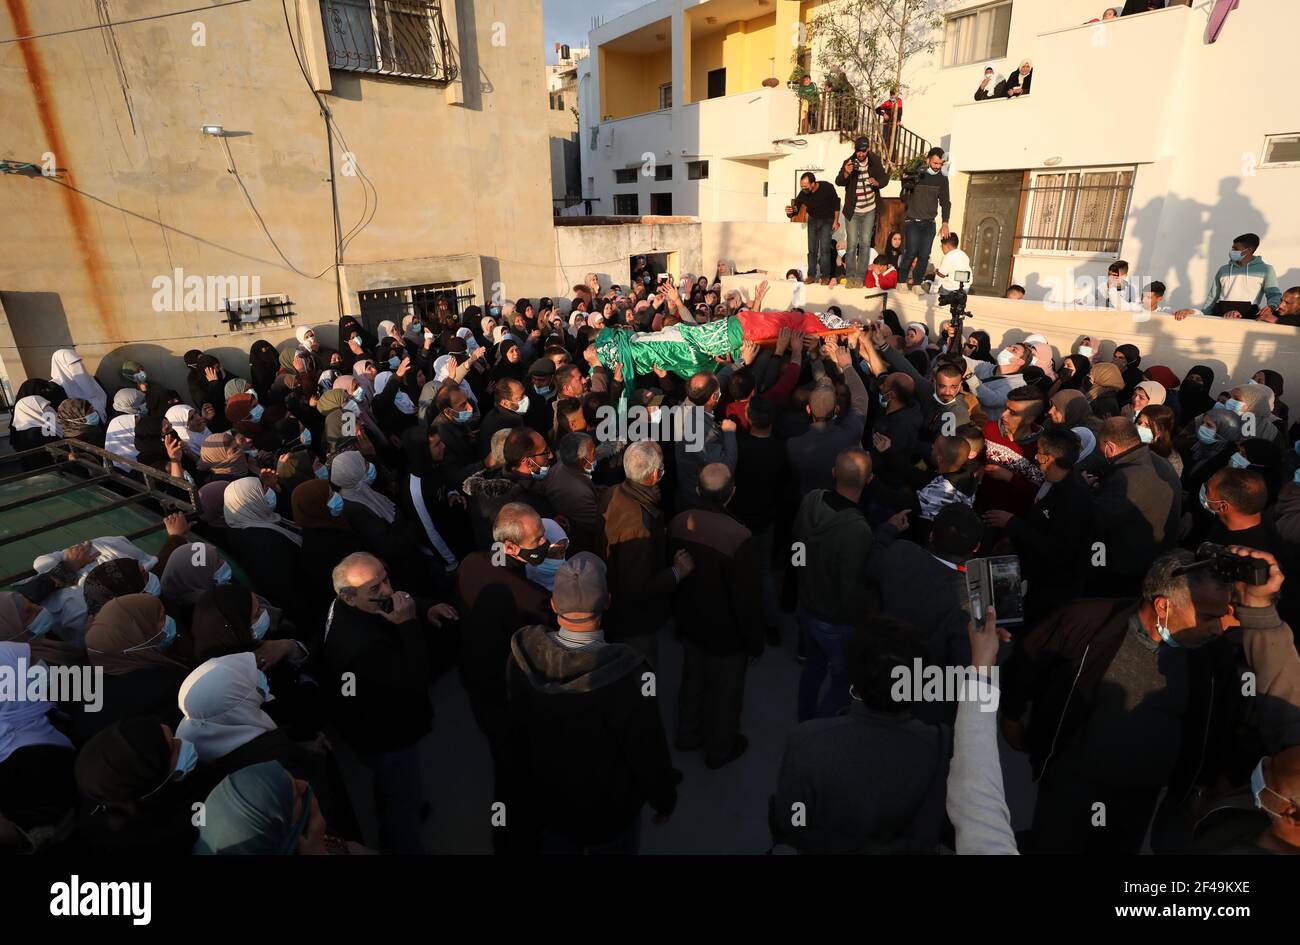 Nablus, Nablus. 19th Mar, 2021. Mourners carry the body of Palestinian Atef Yousef Hanaysha during his funeral in the West Bank village of Beit Dajan, east of Nablus, on March 19, 2021. Atef Yousef Hanaysha was shot dead by Israeli soldiers on Friday afternoon in an anti-settlement rally near Beit Dajan village, medics said. Credit: Ayman Nobani/Xinhua/Alamy Live News Stock Photo